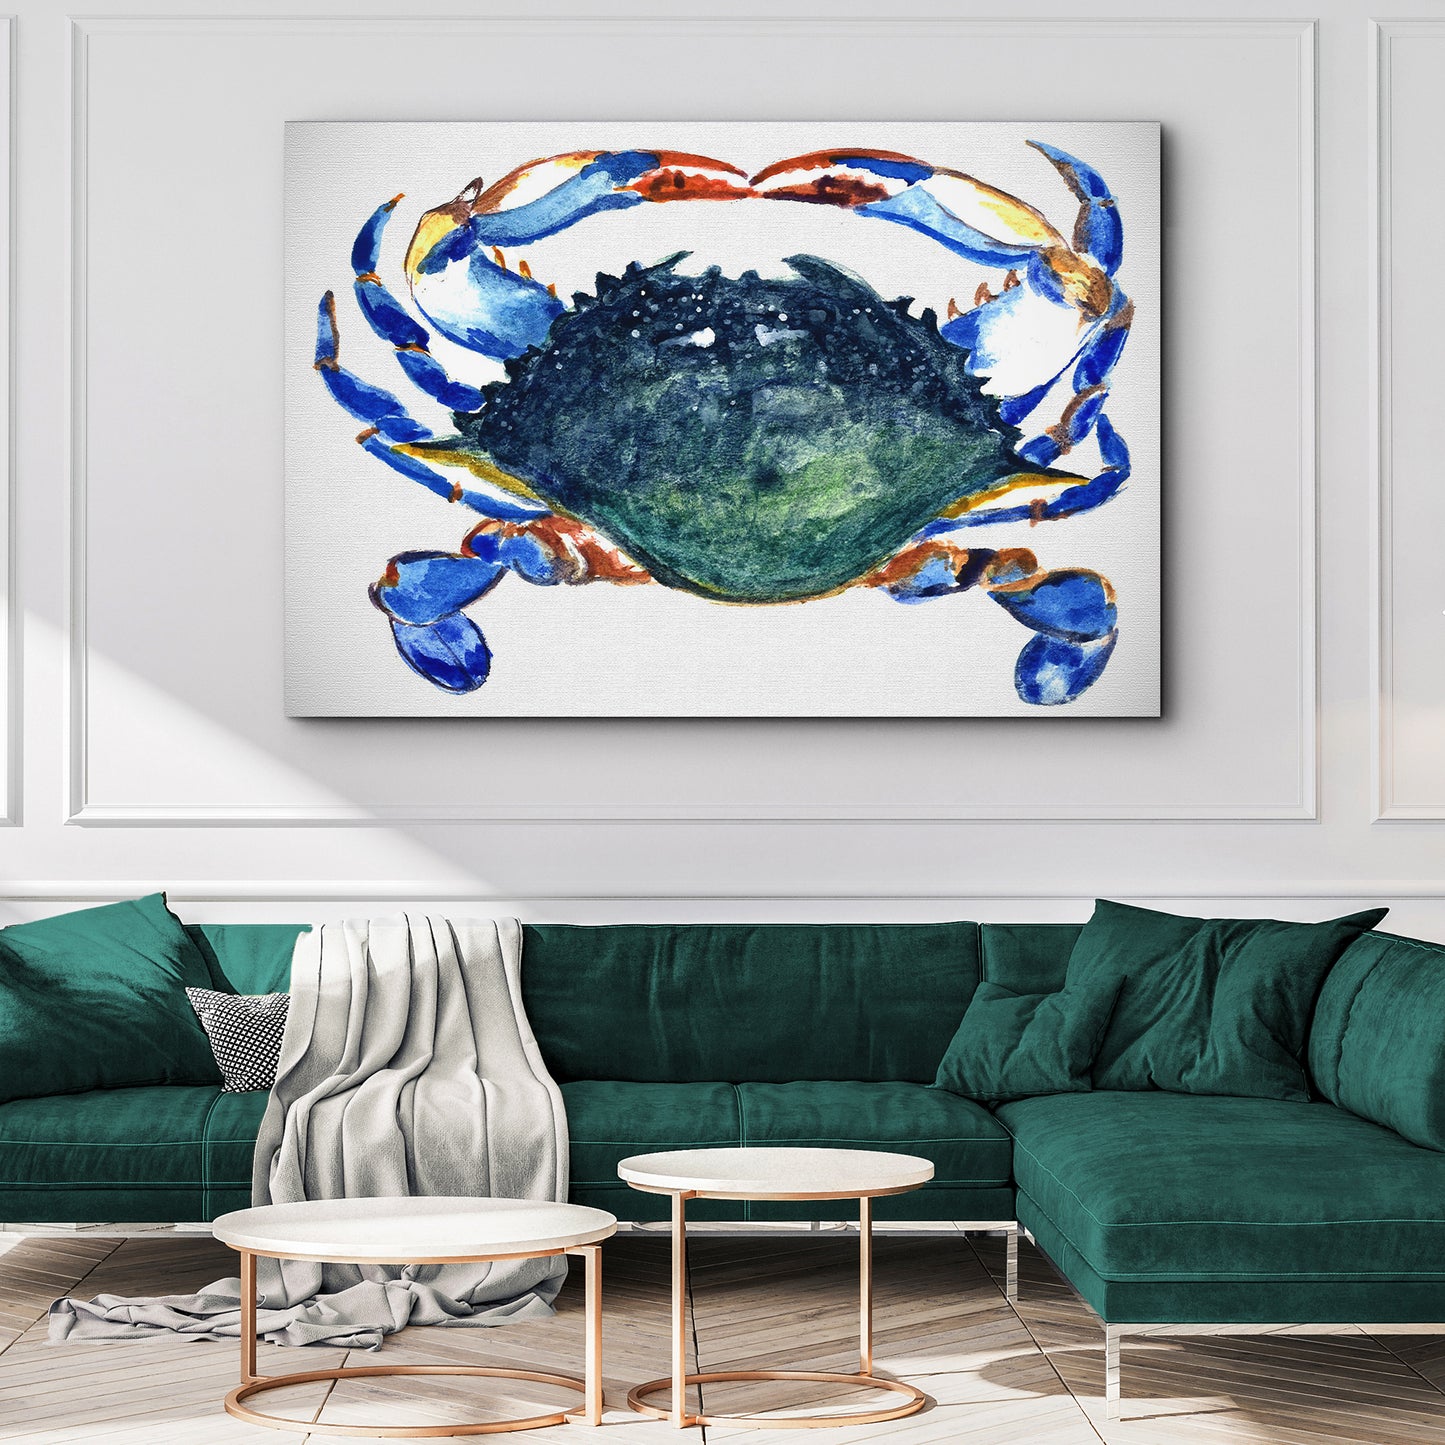 Crab Art Watercolor Wall Art - Image by Tailored Canvases